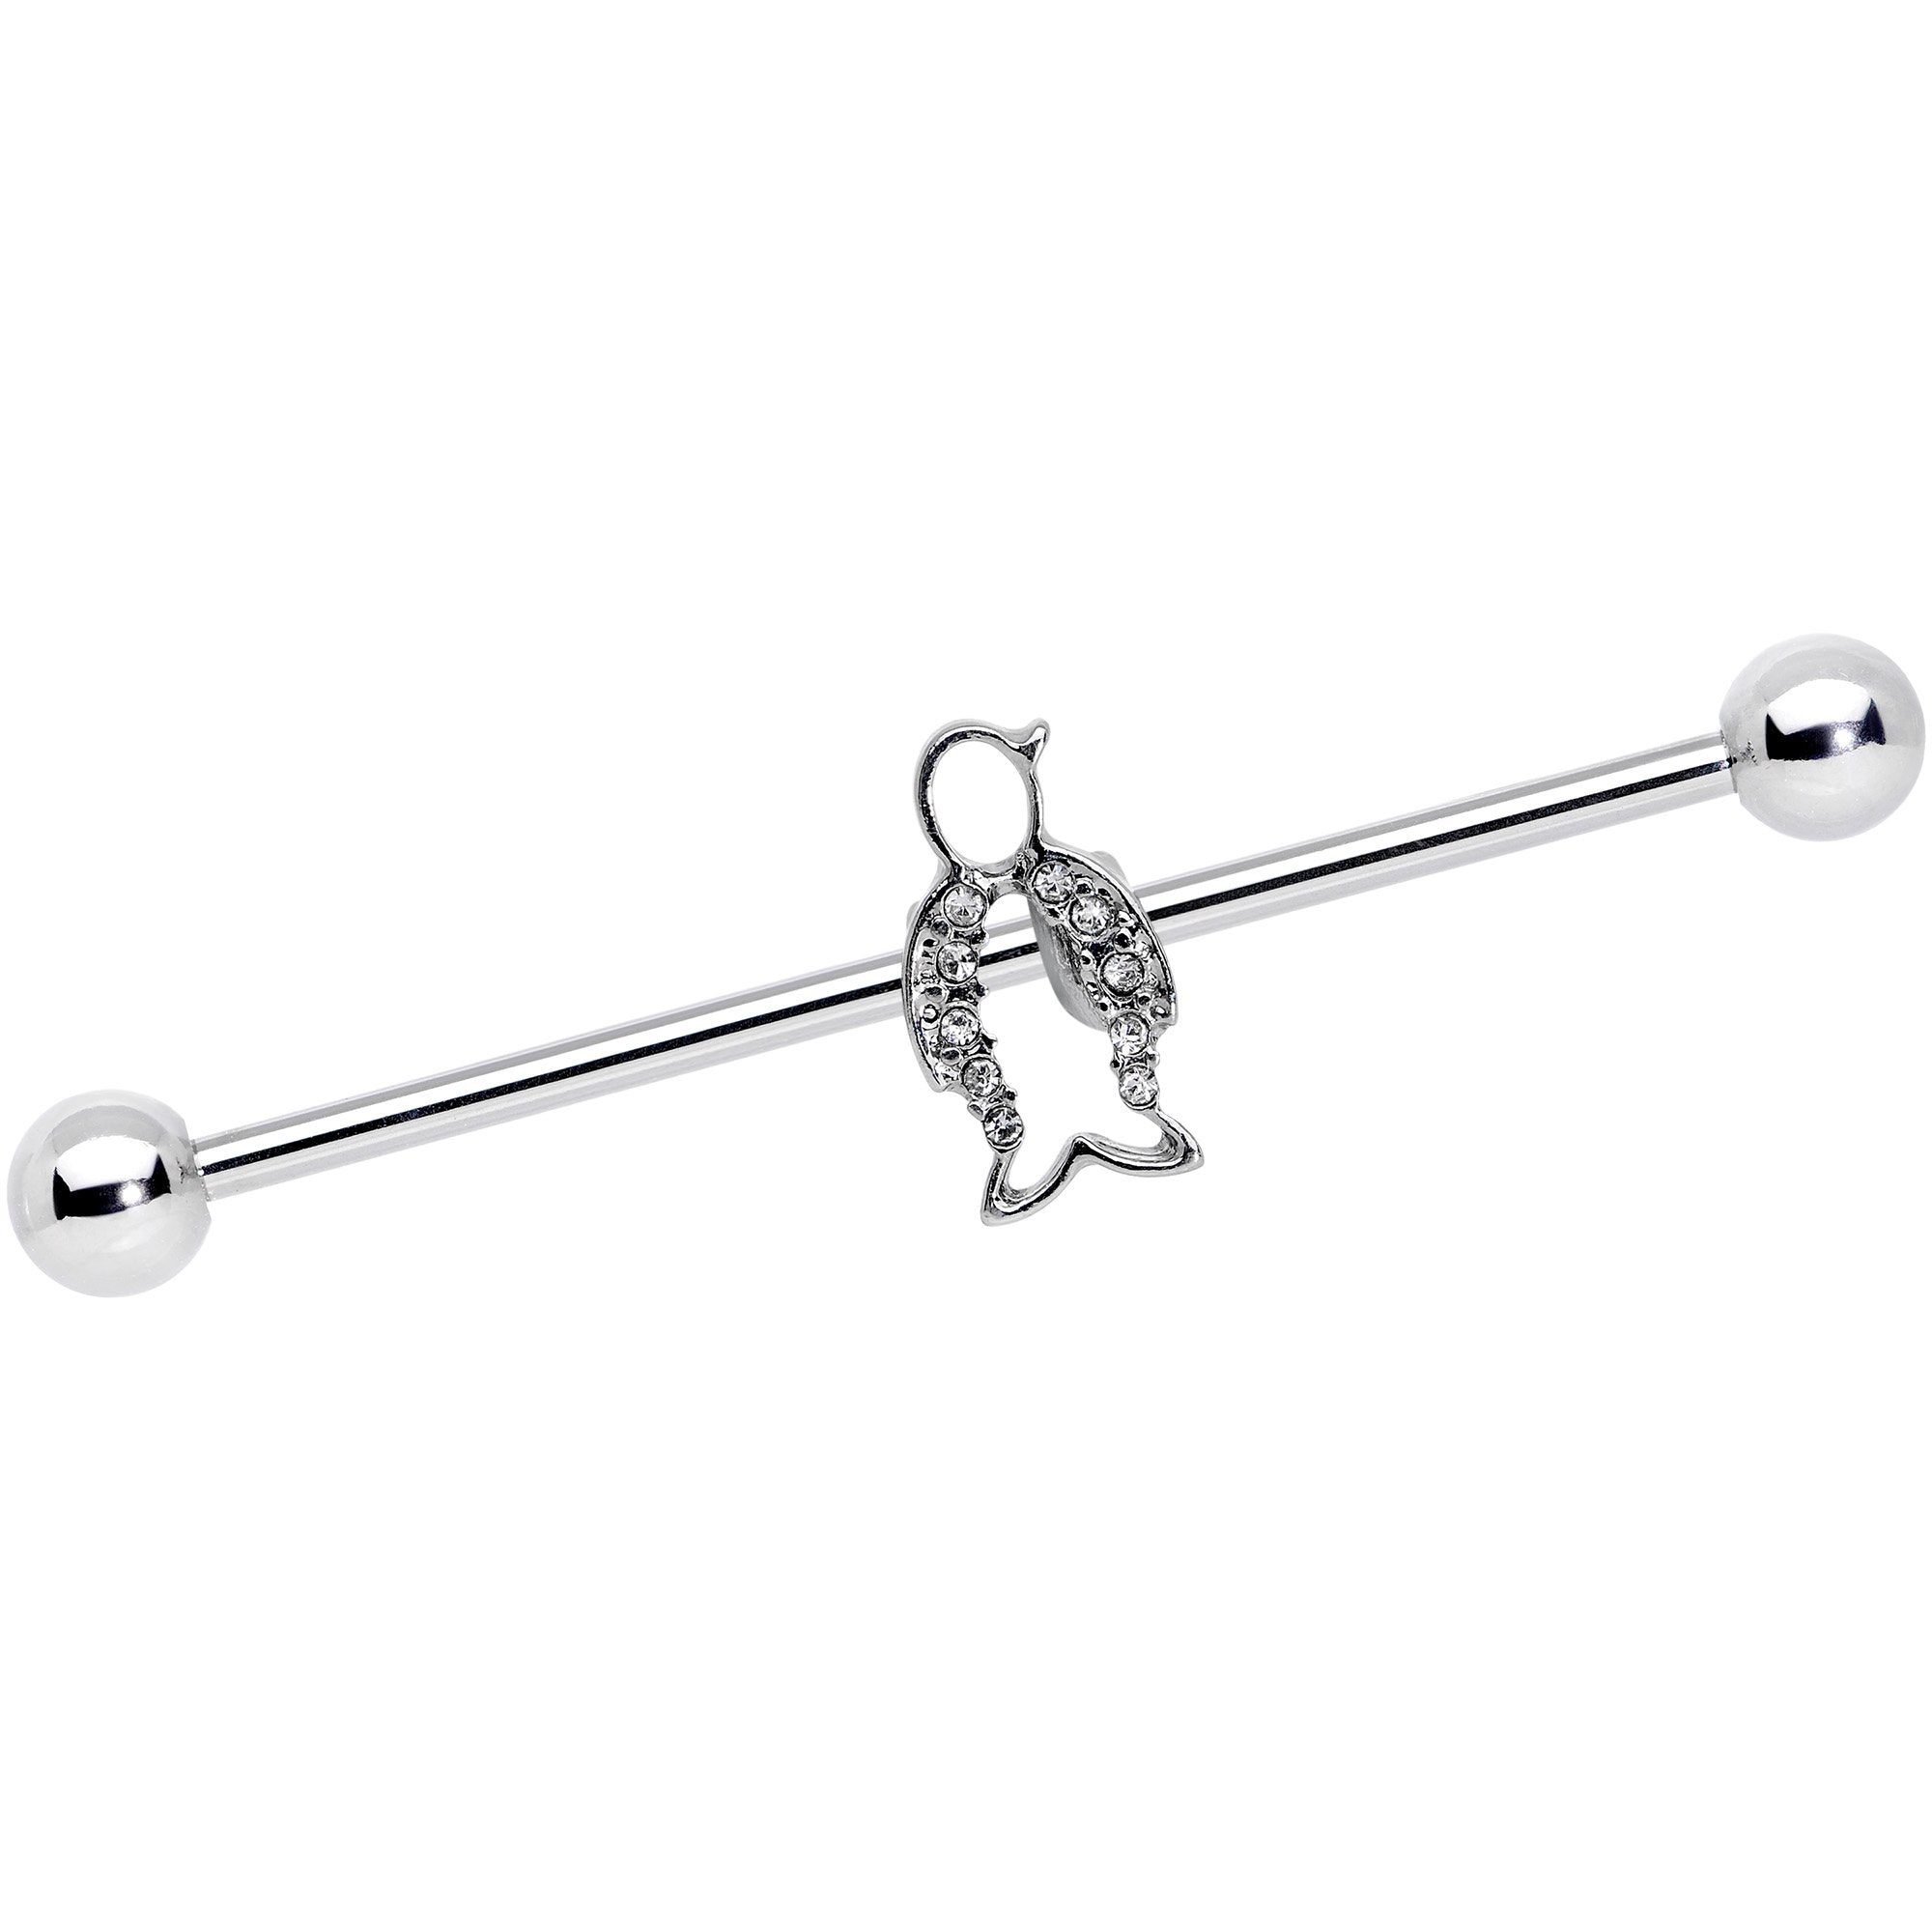 Clear Gem Hollow Penguin Industrial Barbell 38mm